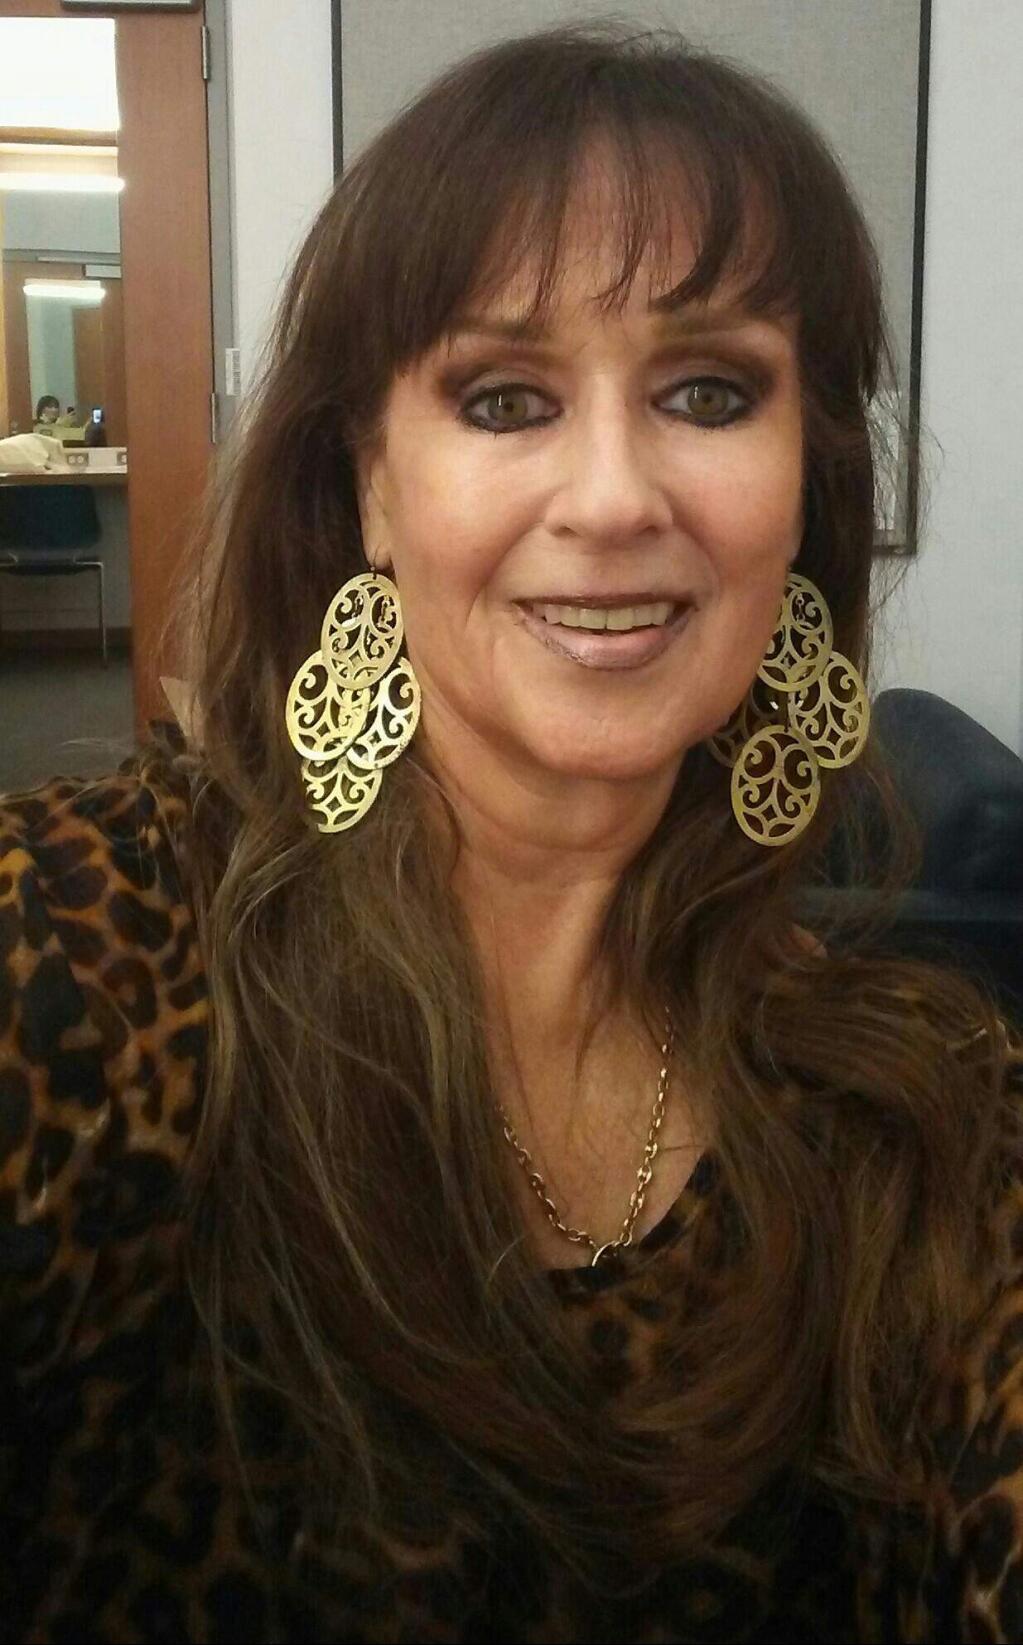 This August 2016 photo provided by Mary Lou Basaraba shows her backstage at the Walt Disney Concert Hall in Los Angeles. Basaraba was in her early 20s and working as a journalist in the winter of 1977-78 when the Montreal Symphony Orchestra asked her to interview conductor Charles Dutoit for an in-house publication, she said. She said she was told Dutoit had specifically requested her for the interview, to be held at his apartment. Within minutes of her arrival, she said, Dutoit forced himself on her. (Mary Lou Basaraba via AP)